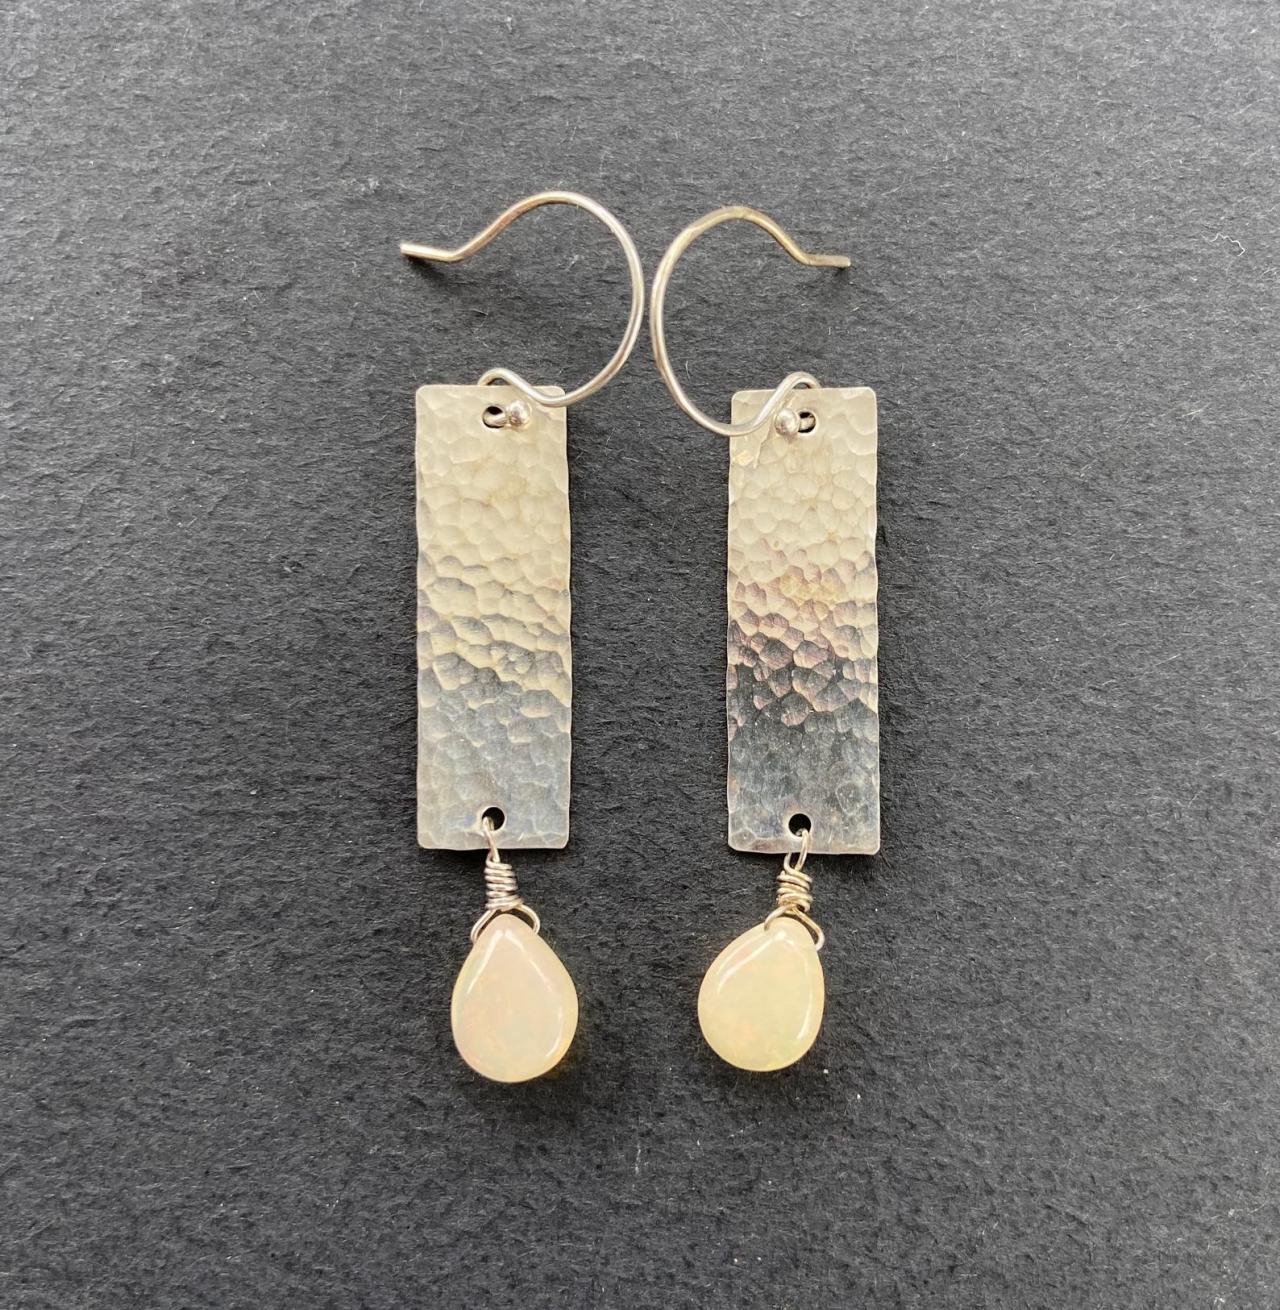 Opal Long Rectangle Drop Dangle Brass Patterned Earrings Earthy Natural Boho Tooled Leather Western 14kt Gold Filled